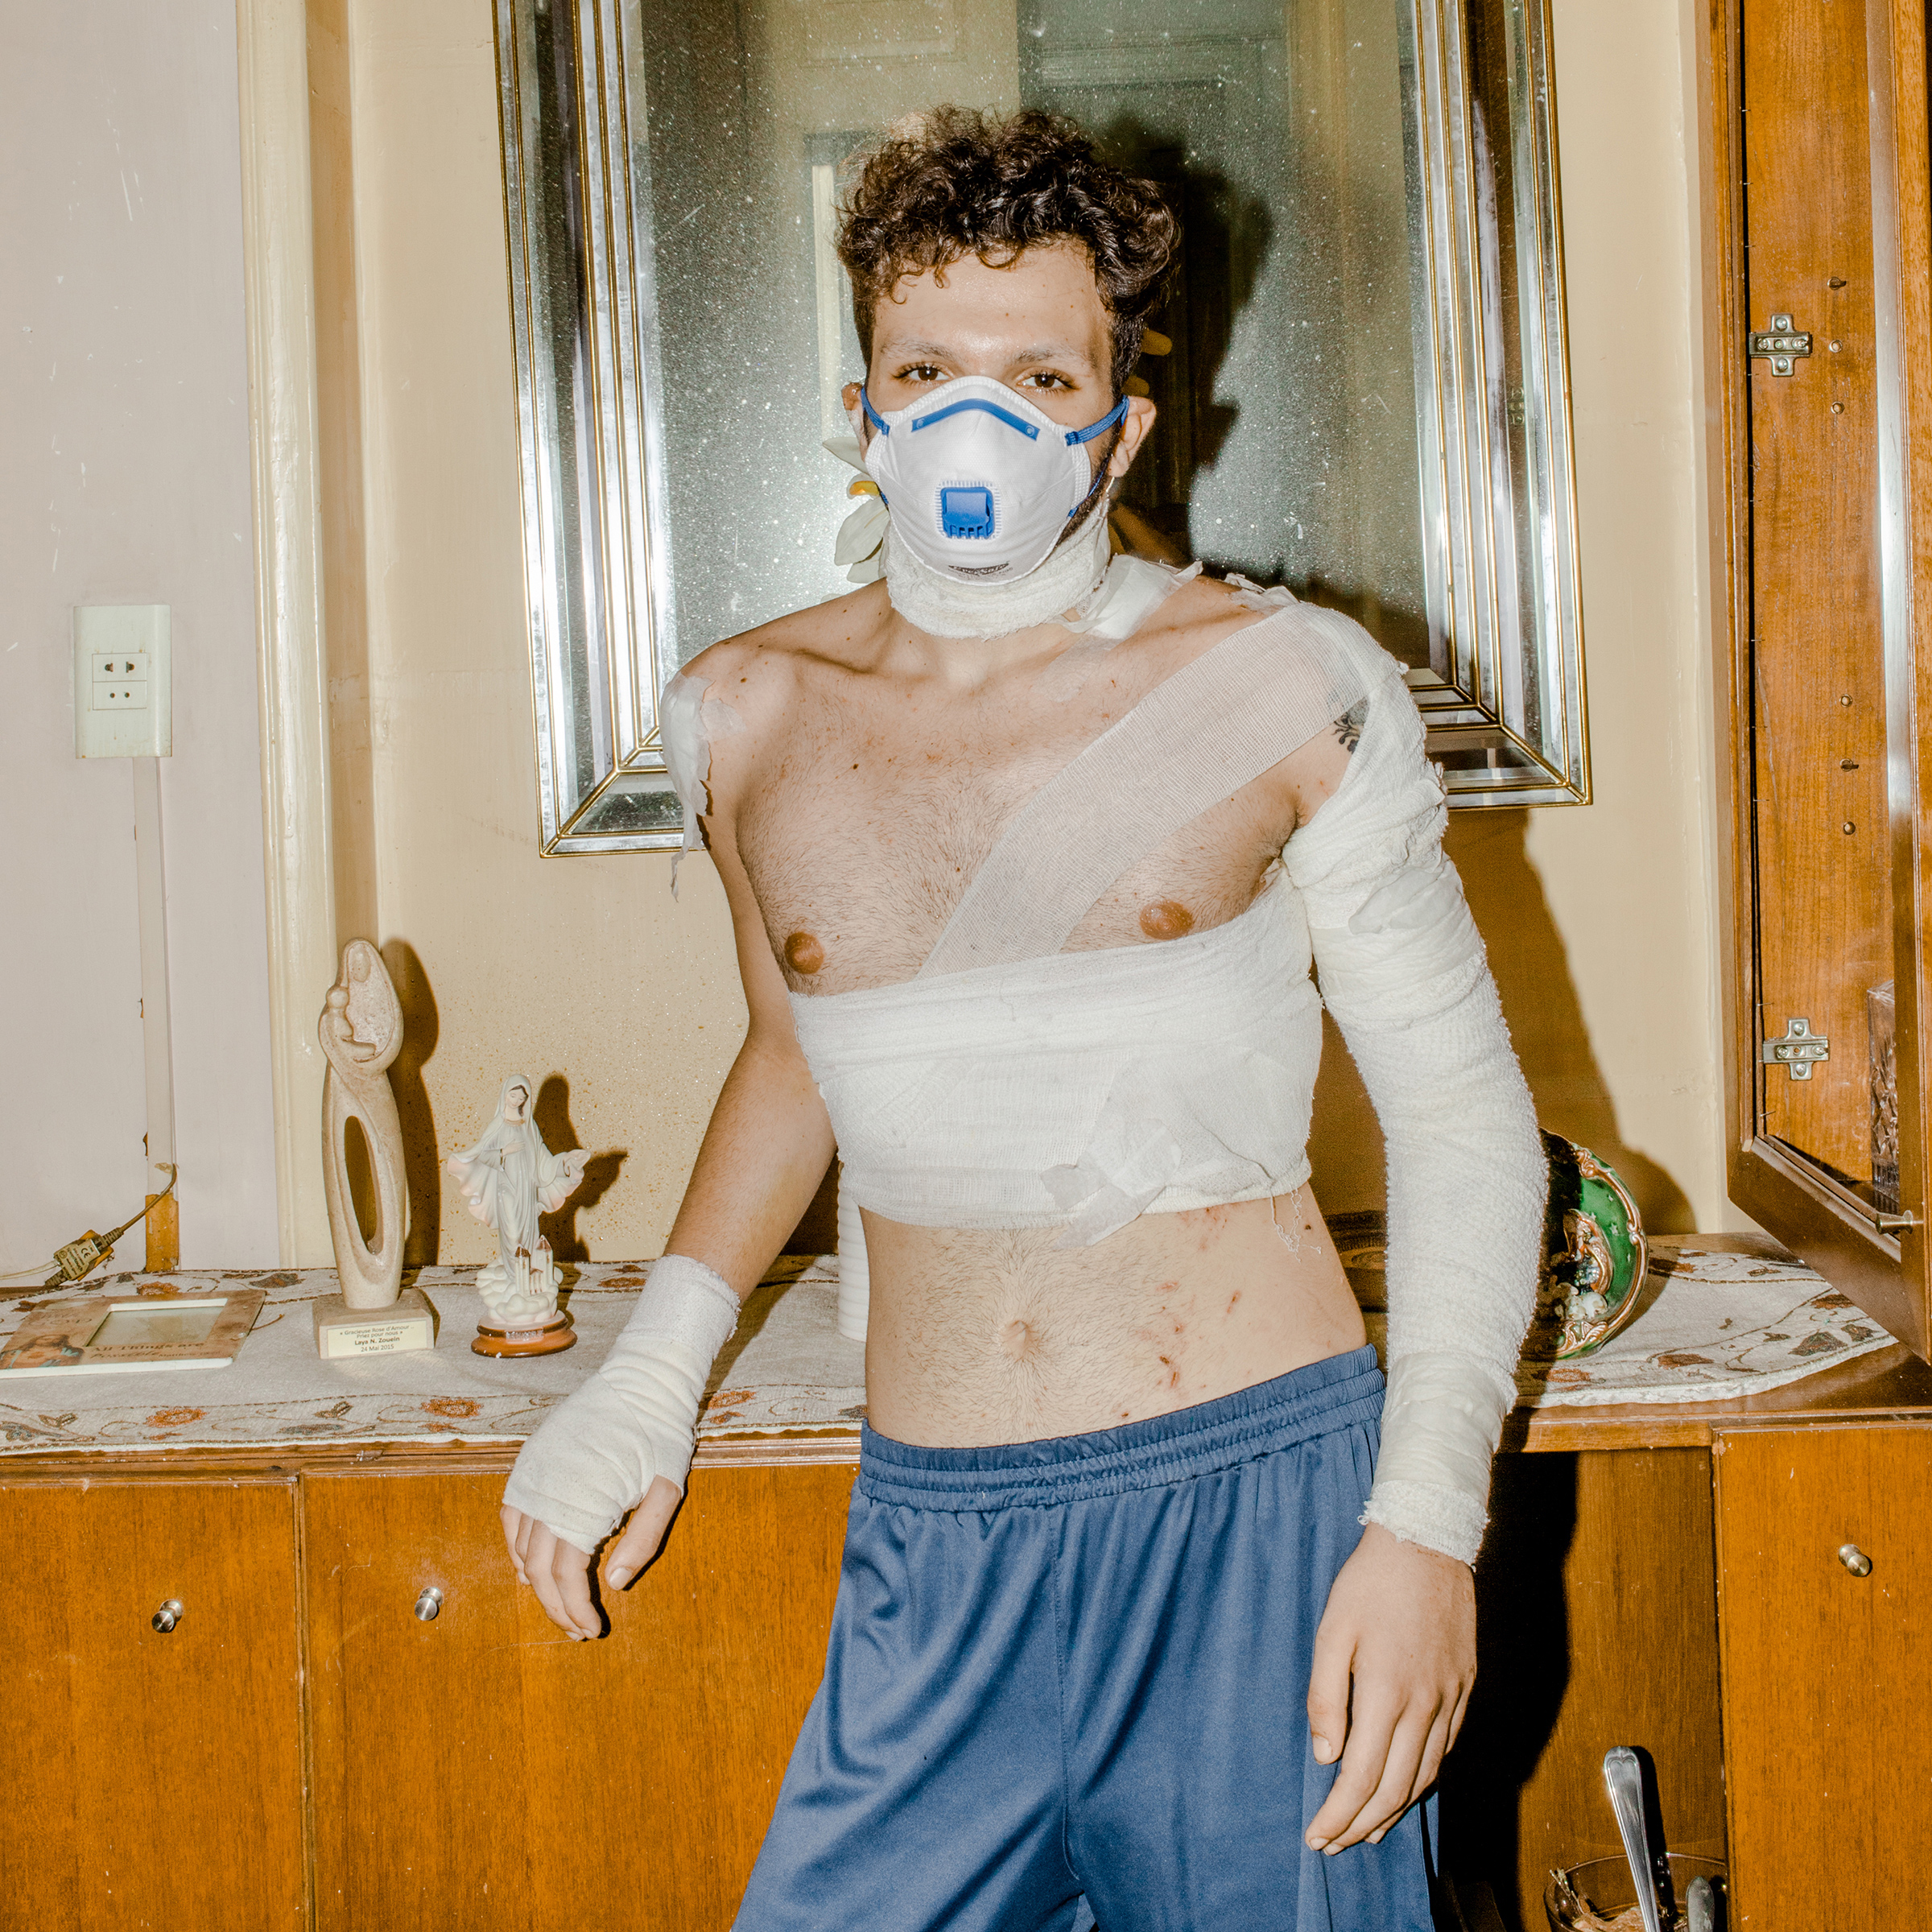 <strong> Andrea</strong>, a drag performer in Beirut who was injured in the Aug. 4 port blast. "<a href="https://time.com/5879192/beirut-explosion-lebanon-reform/">After the Explosion</a>," Aug. 31 issue. (Myriam Boulos for TIME)